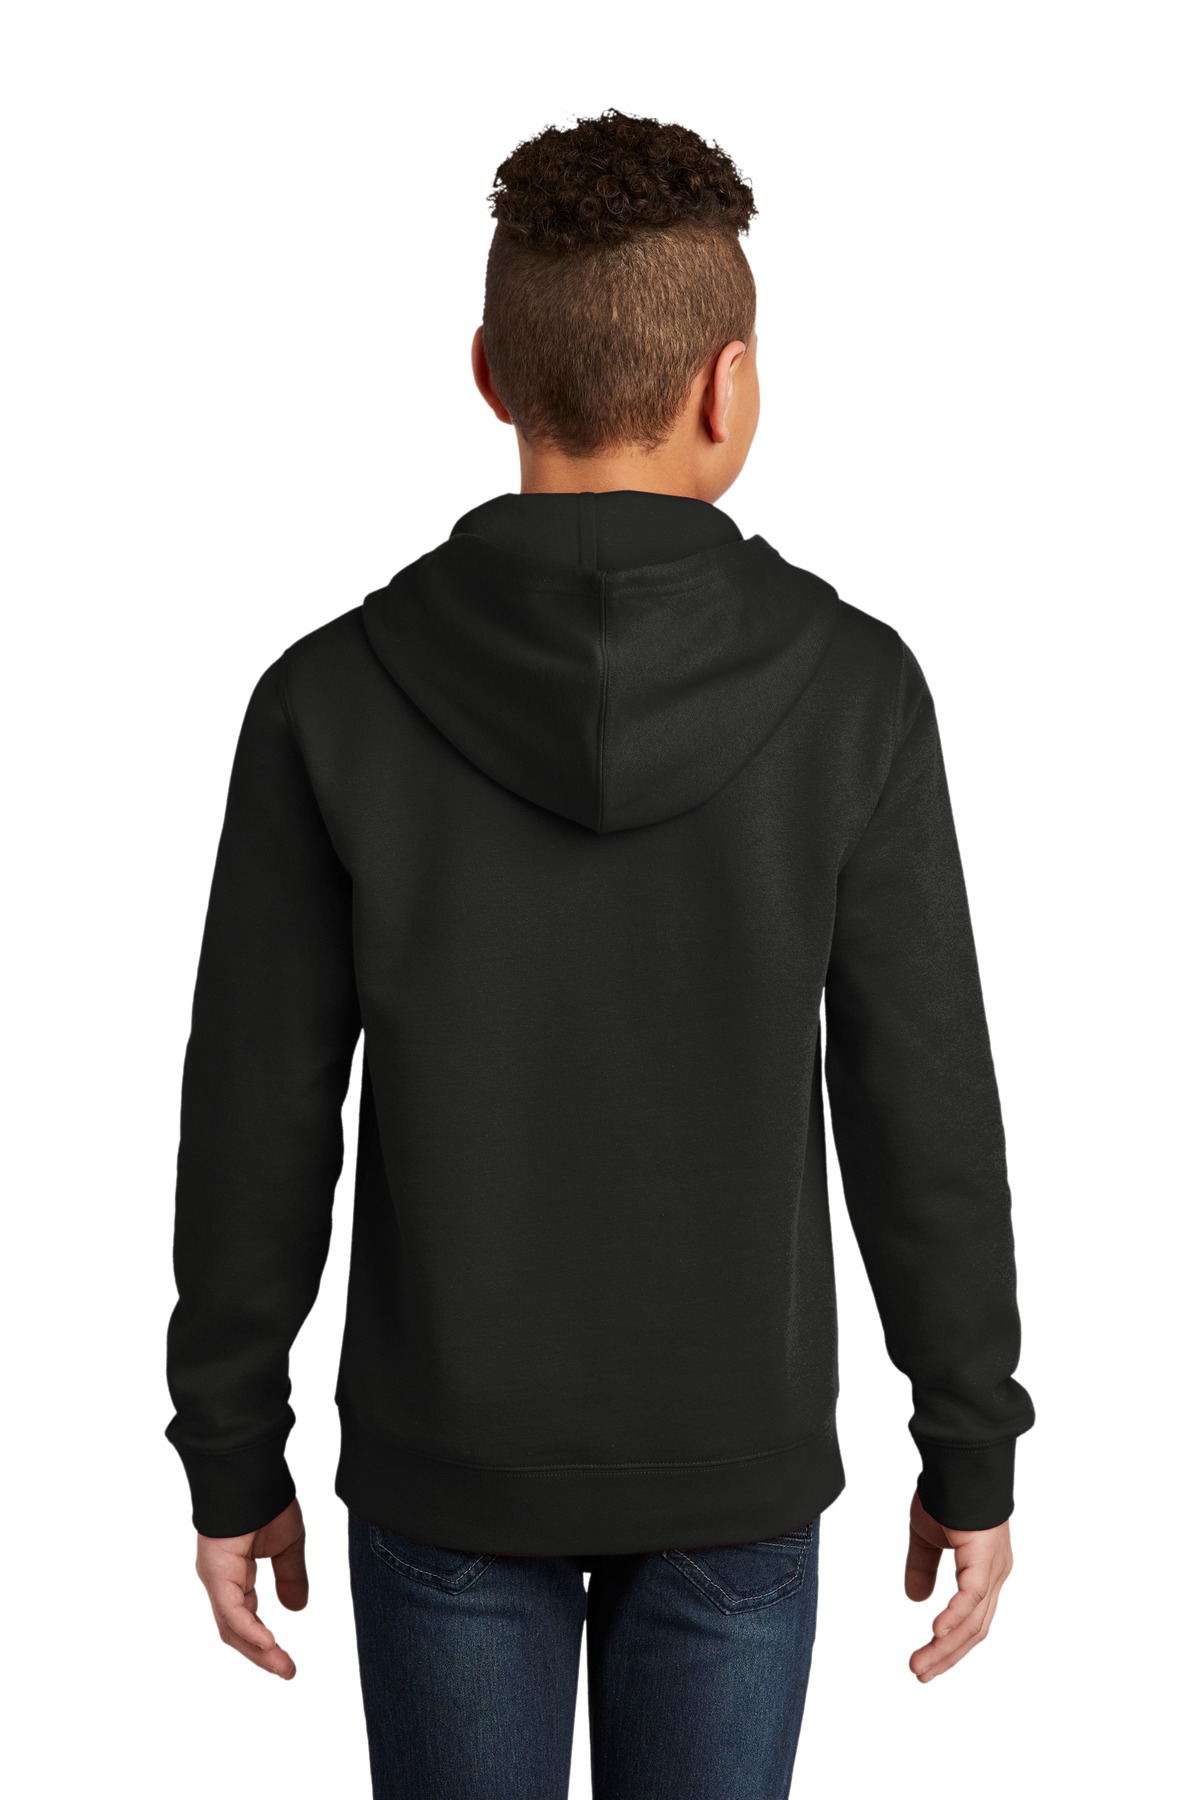 District DT6100Y | Youth V.I.T. ™ Fleece Hoodie | ShirtSpace